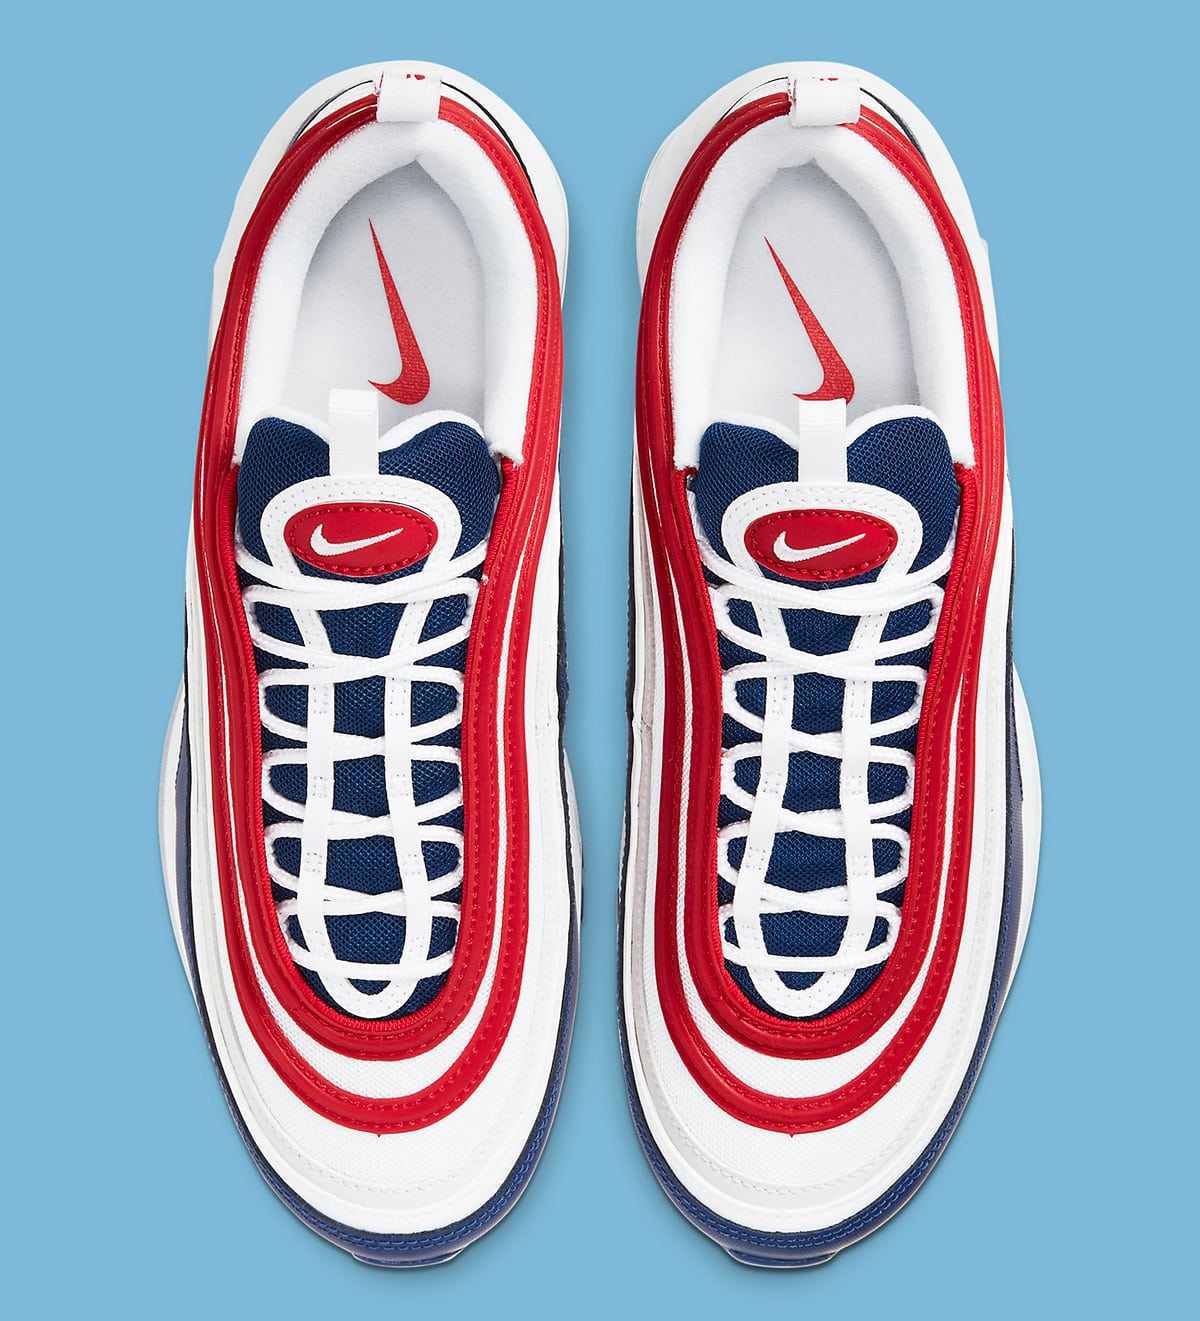 nike-air-max-97-white-navy-red-cw5584-100-release-date-info-4